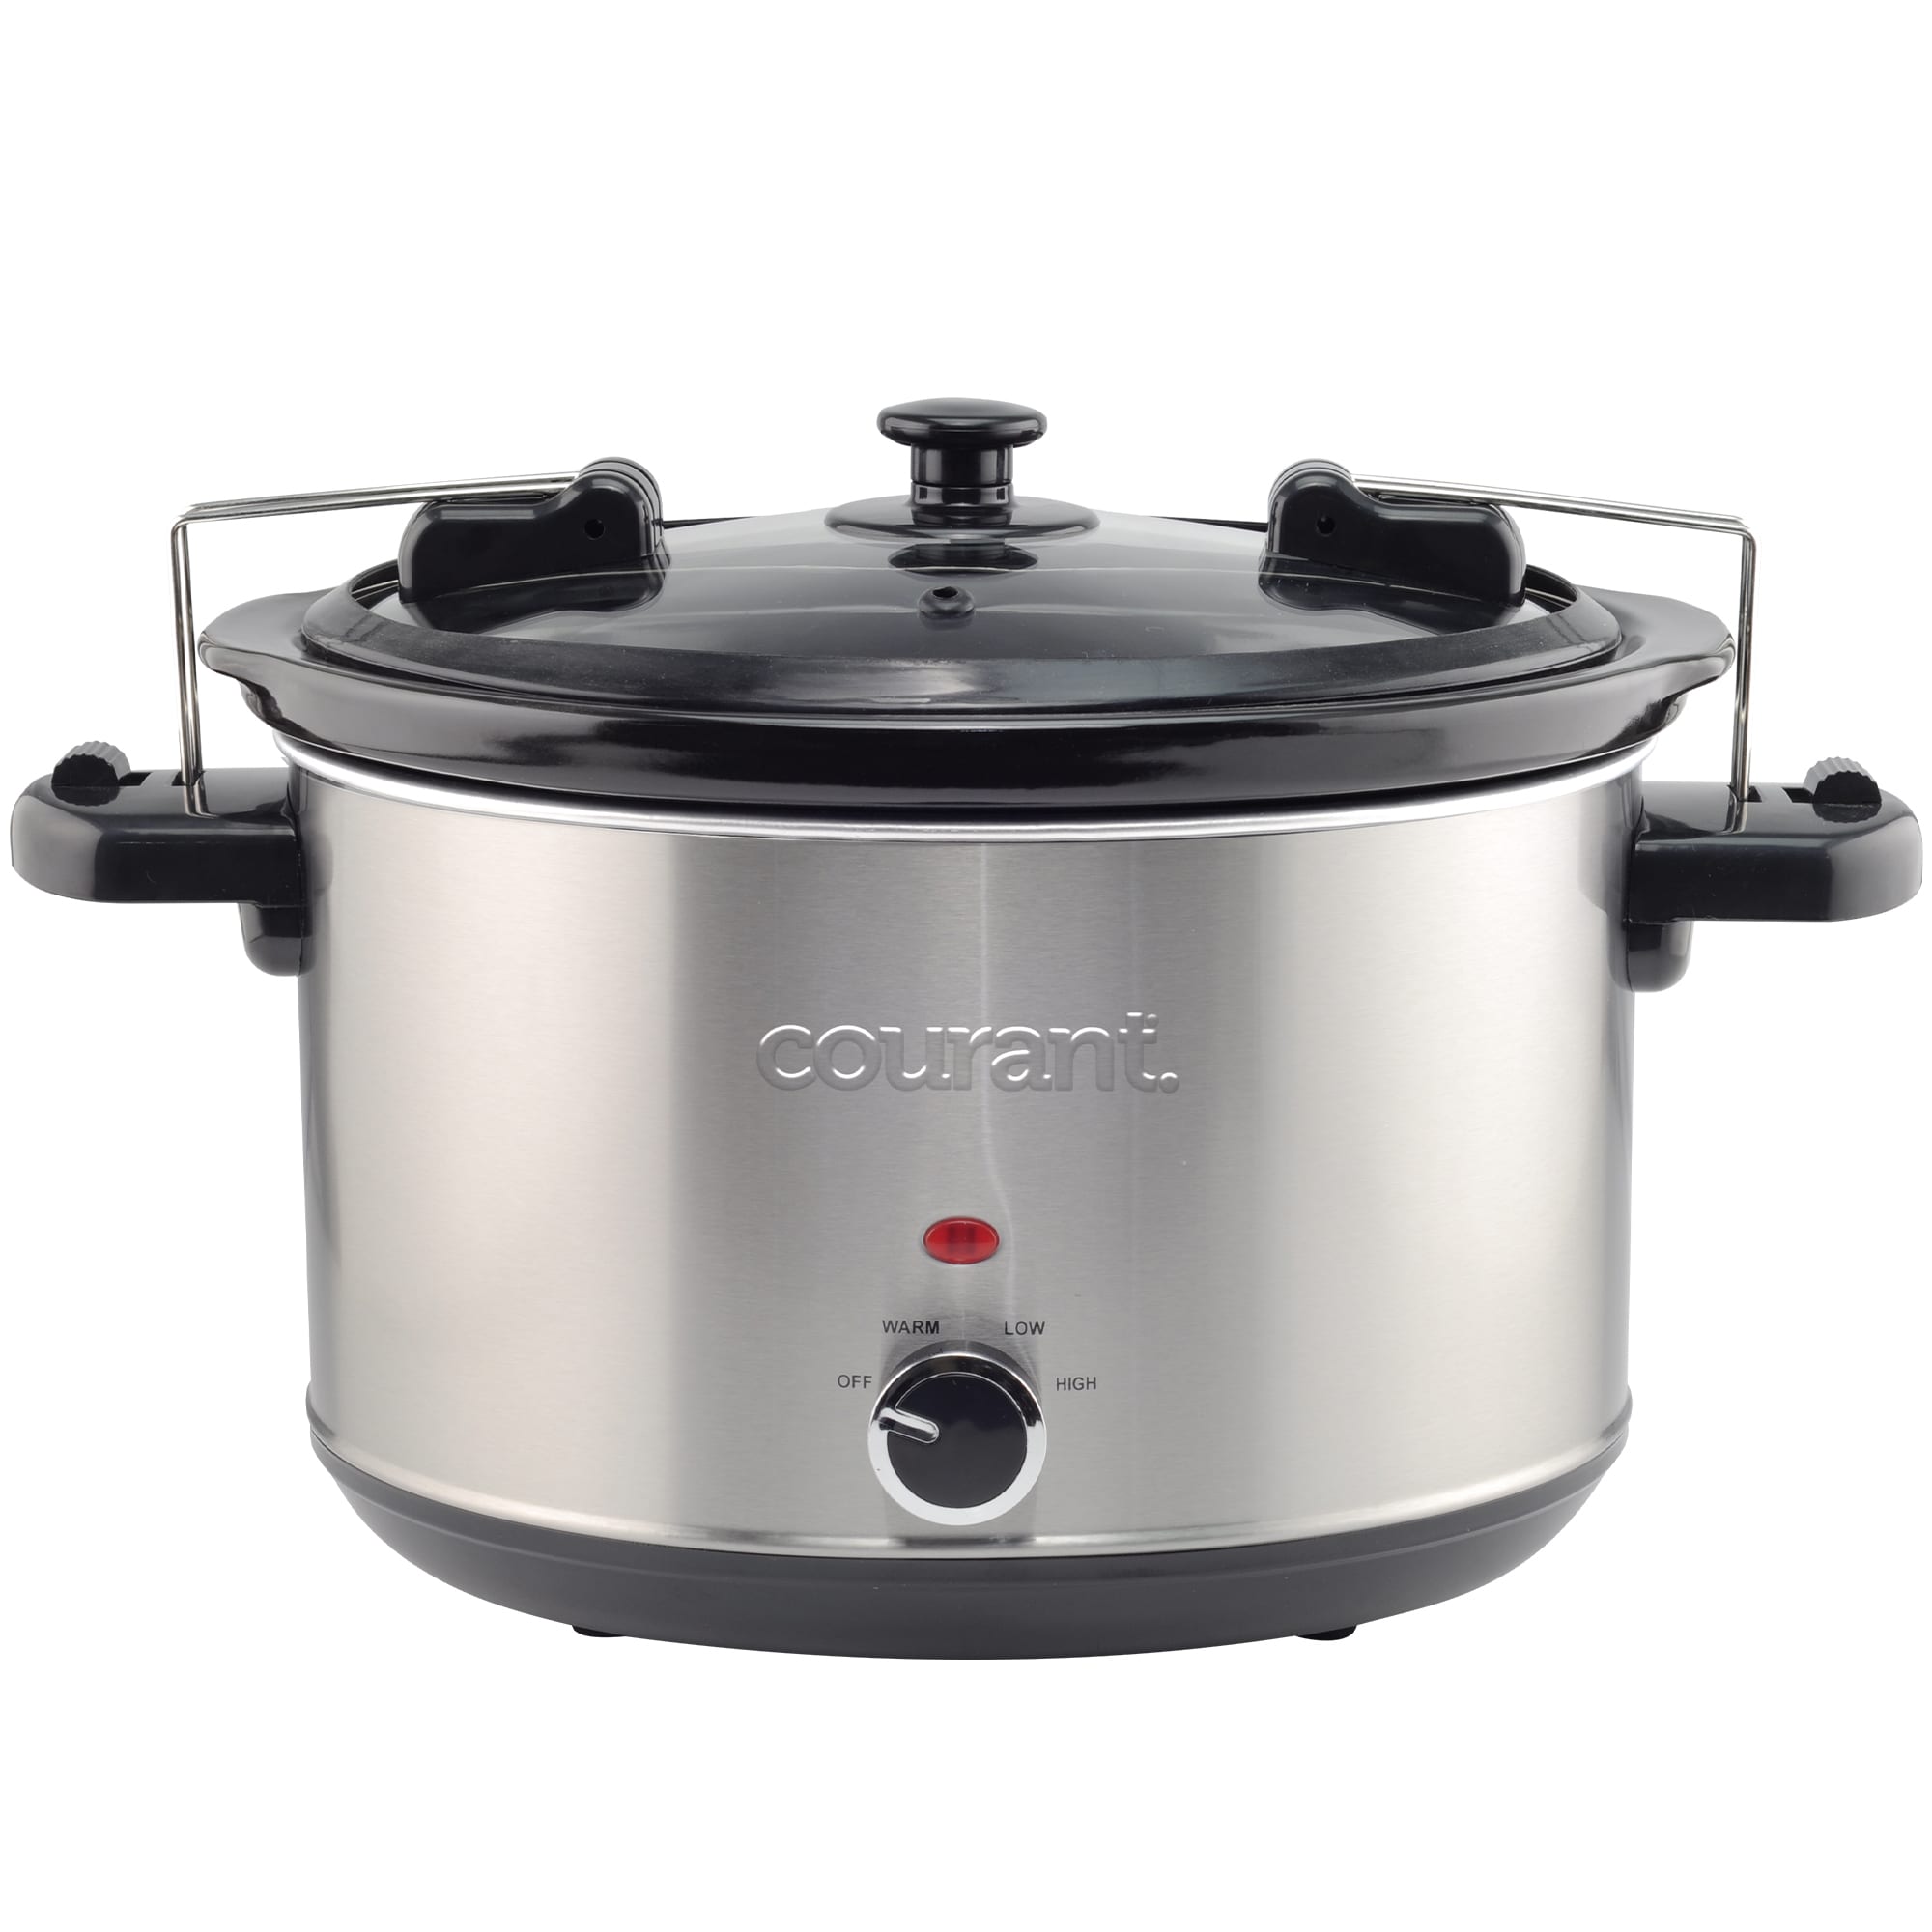  Courant Double Slow Cooker 2.5 Quart Crock each, 5.0 Quart  Total Pots, with Individual Easy Cooking Options, Dishwasher Safe  Stainproof Stoneware Pots and Glass Lids, Stainless Steel: Home & Kitchen